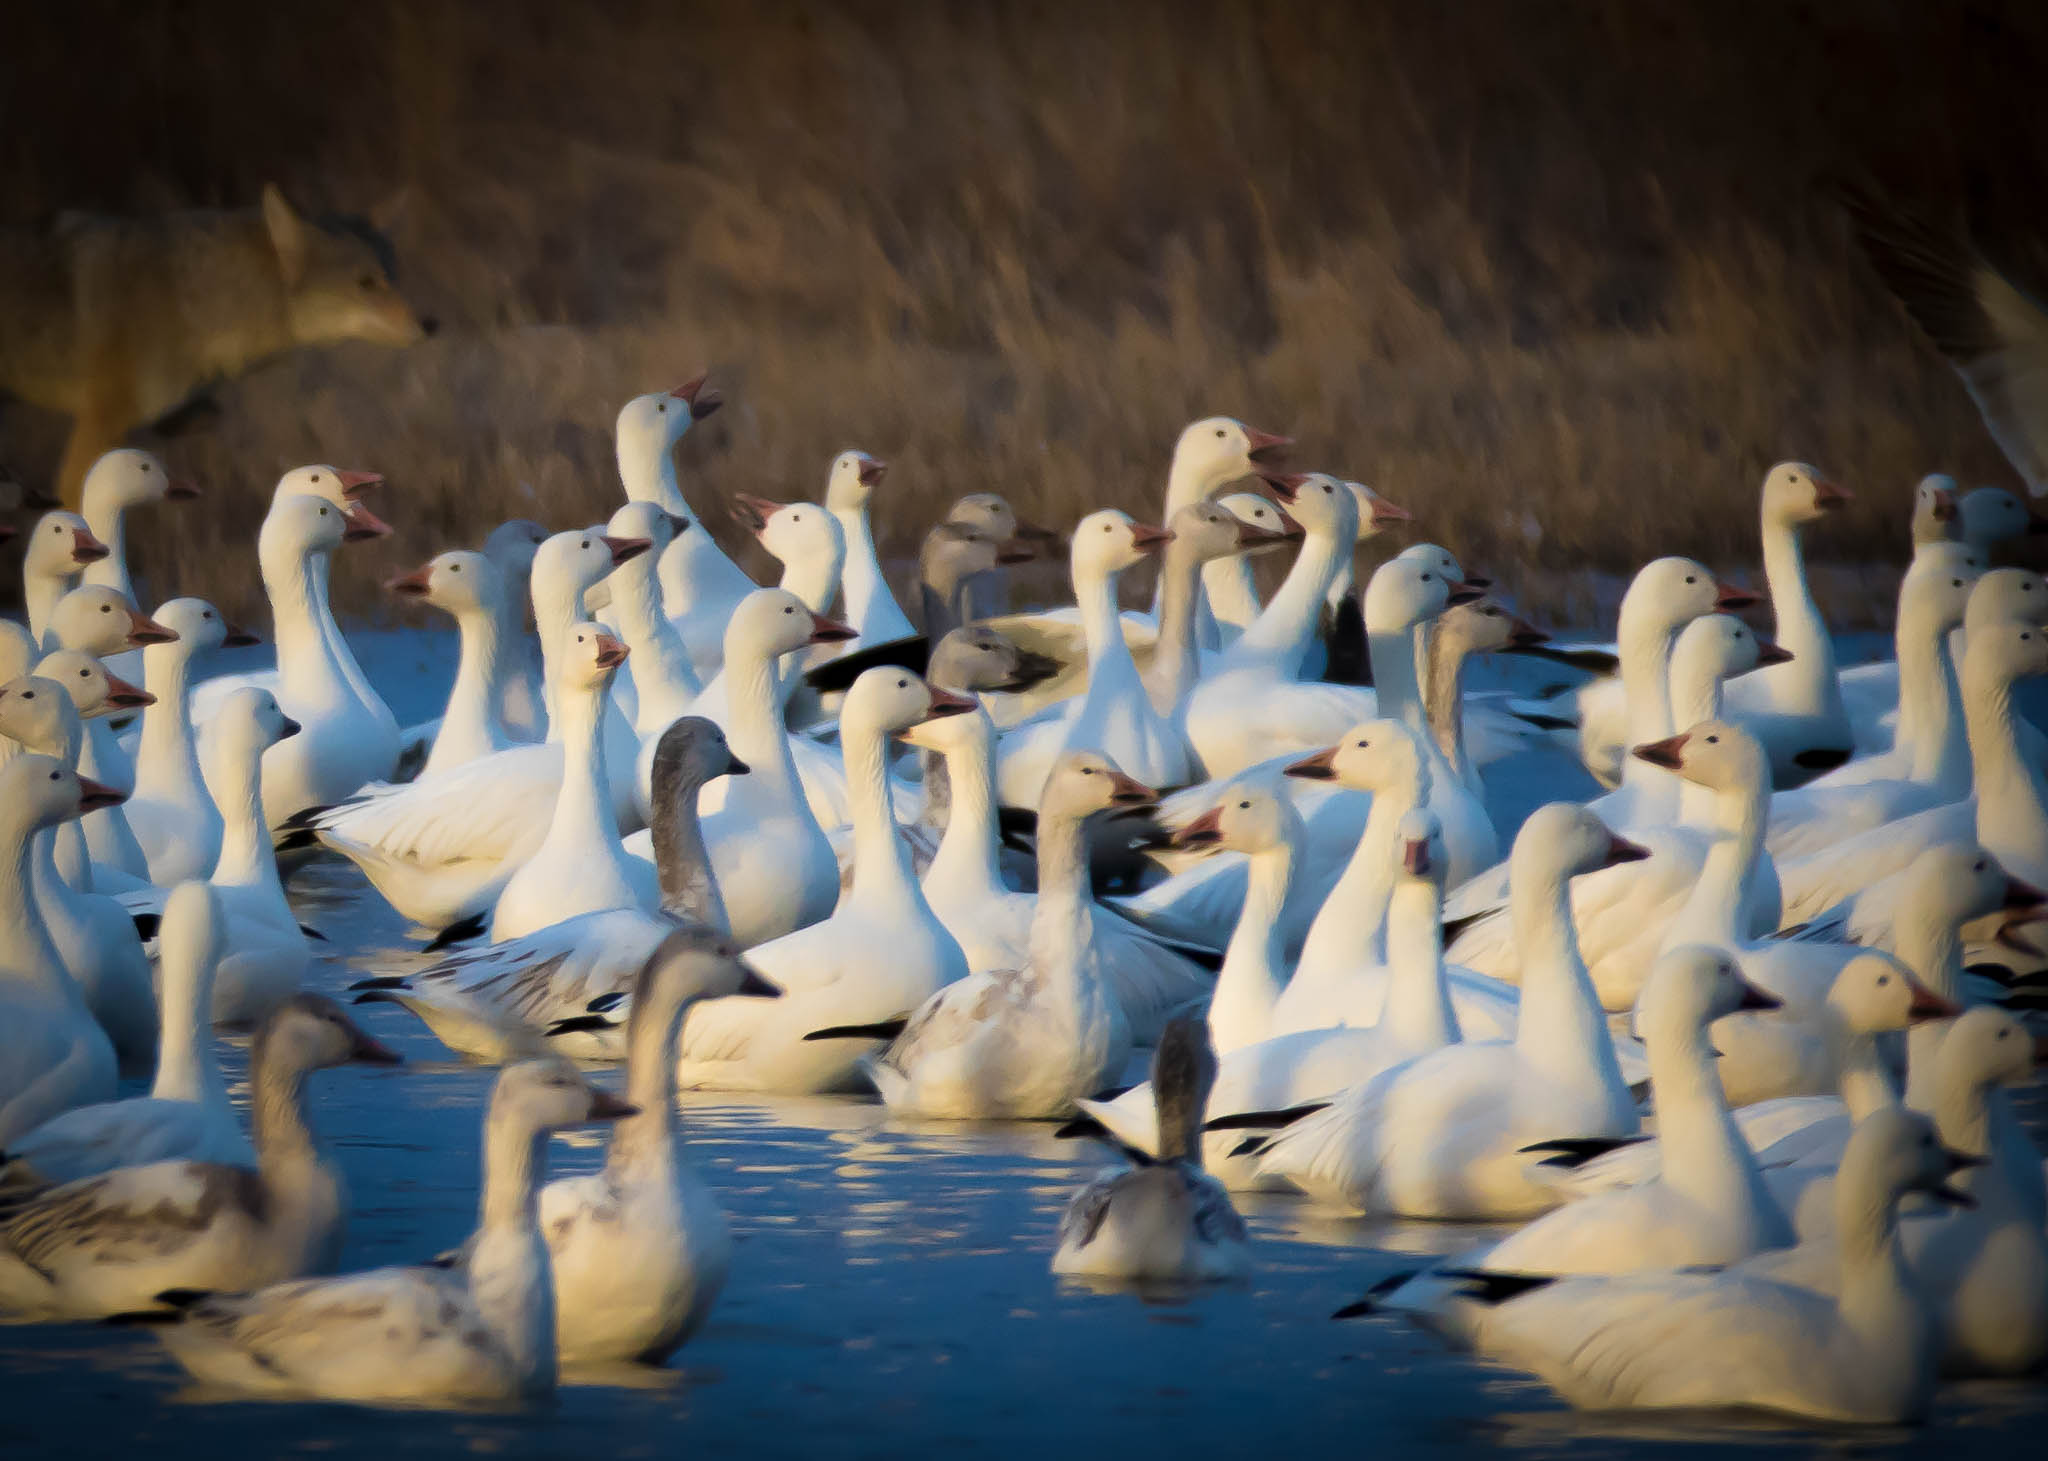 Snow Geese and Coyote, Bosque del Apache National Wildlife Refuge, San Antonio NM, January 29, 2015